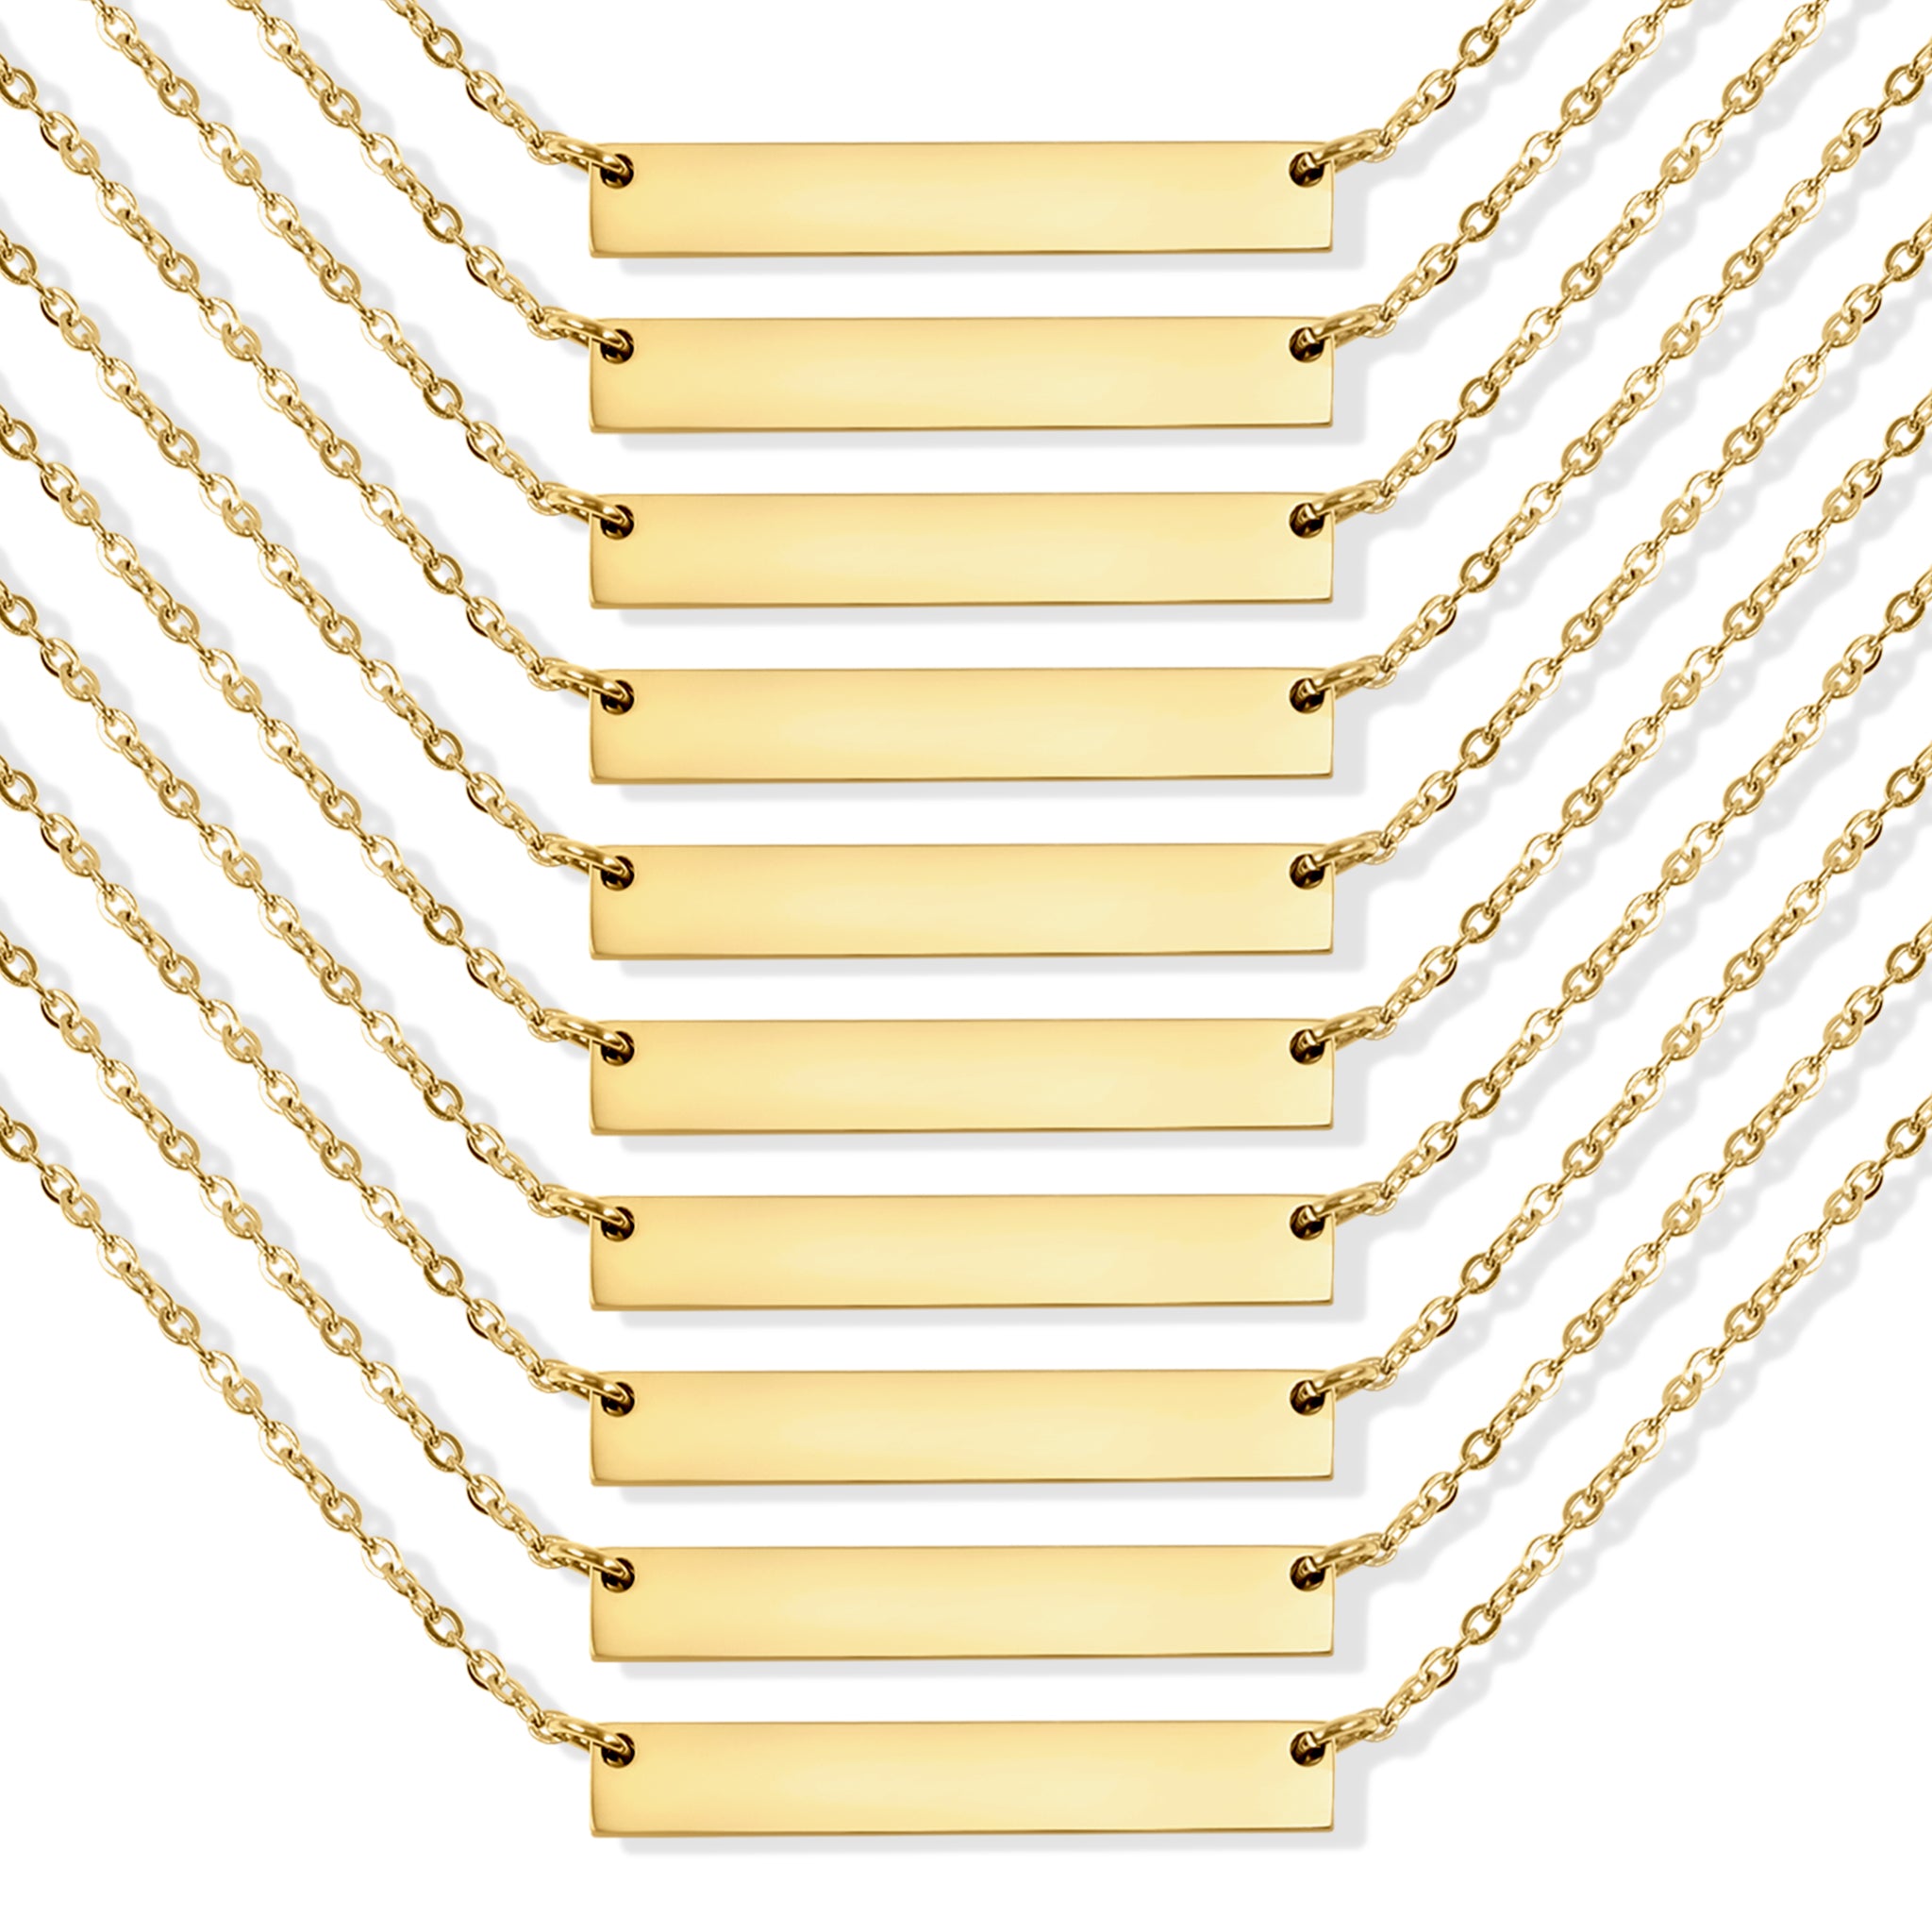 10 Pack - 18K Gold PVD Coated Stainless Steel Blank Polished Bar Necklace / SBB0019